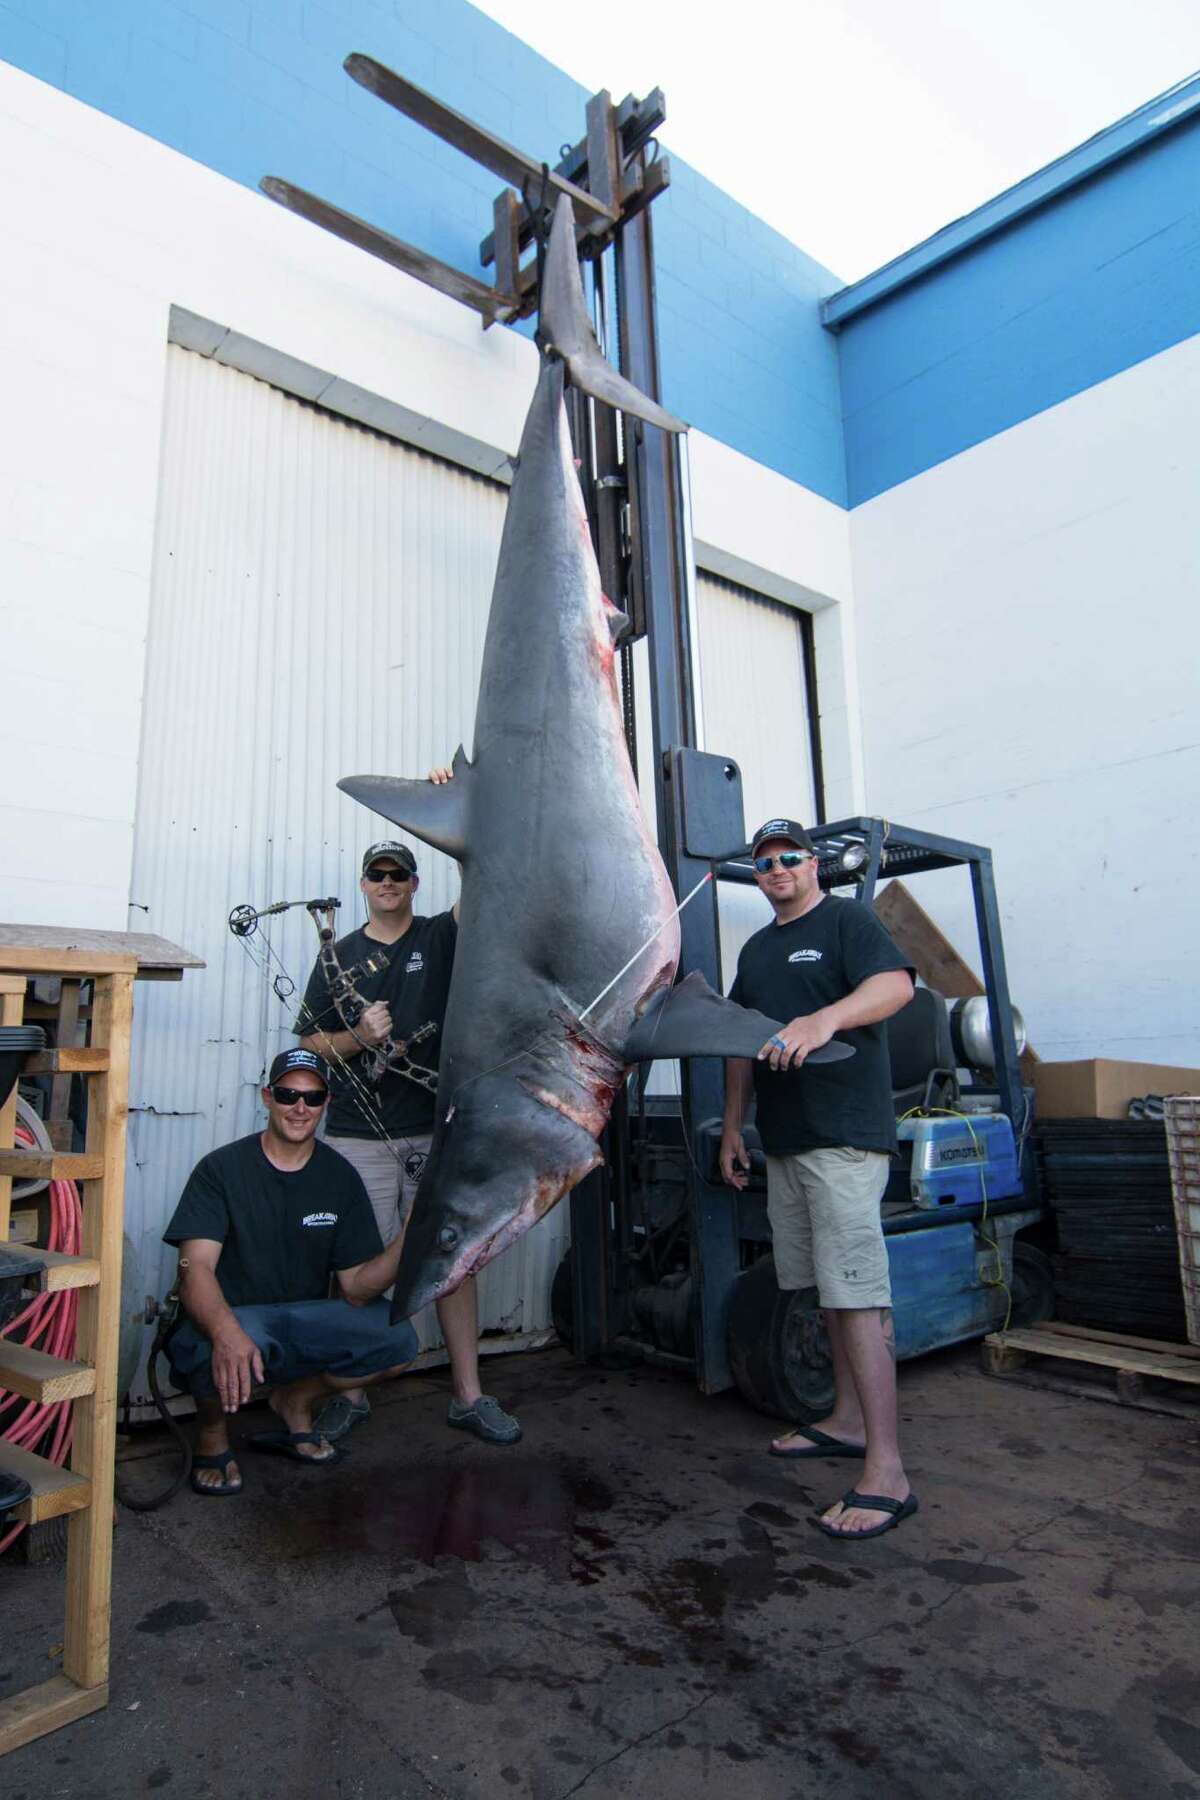 TV host Jeff Thomason, of Weatherford, Texas, landed a world bowfishing record for Mako shark August 12 off the coast of Huntington Beach, California. The shark, which weighed 809.5 pounds and stretched 11 feet, beat the previous world bowfishing record for Mako by about 300 pounds, according to the Bowfishing Association of America.